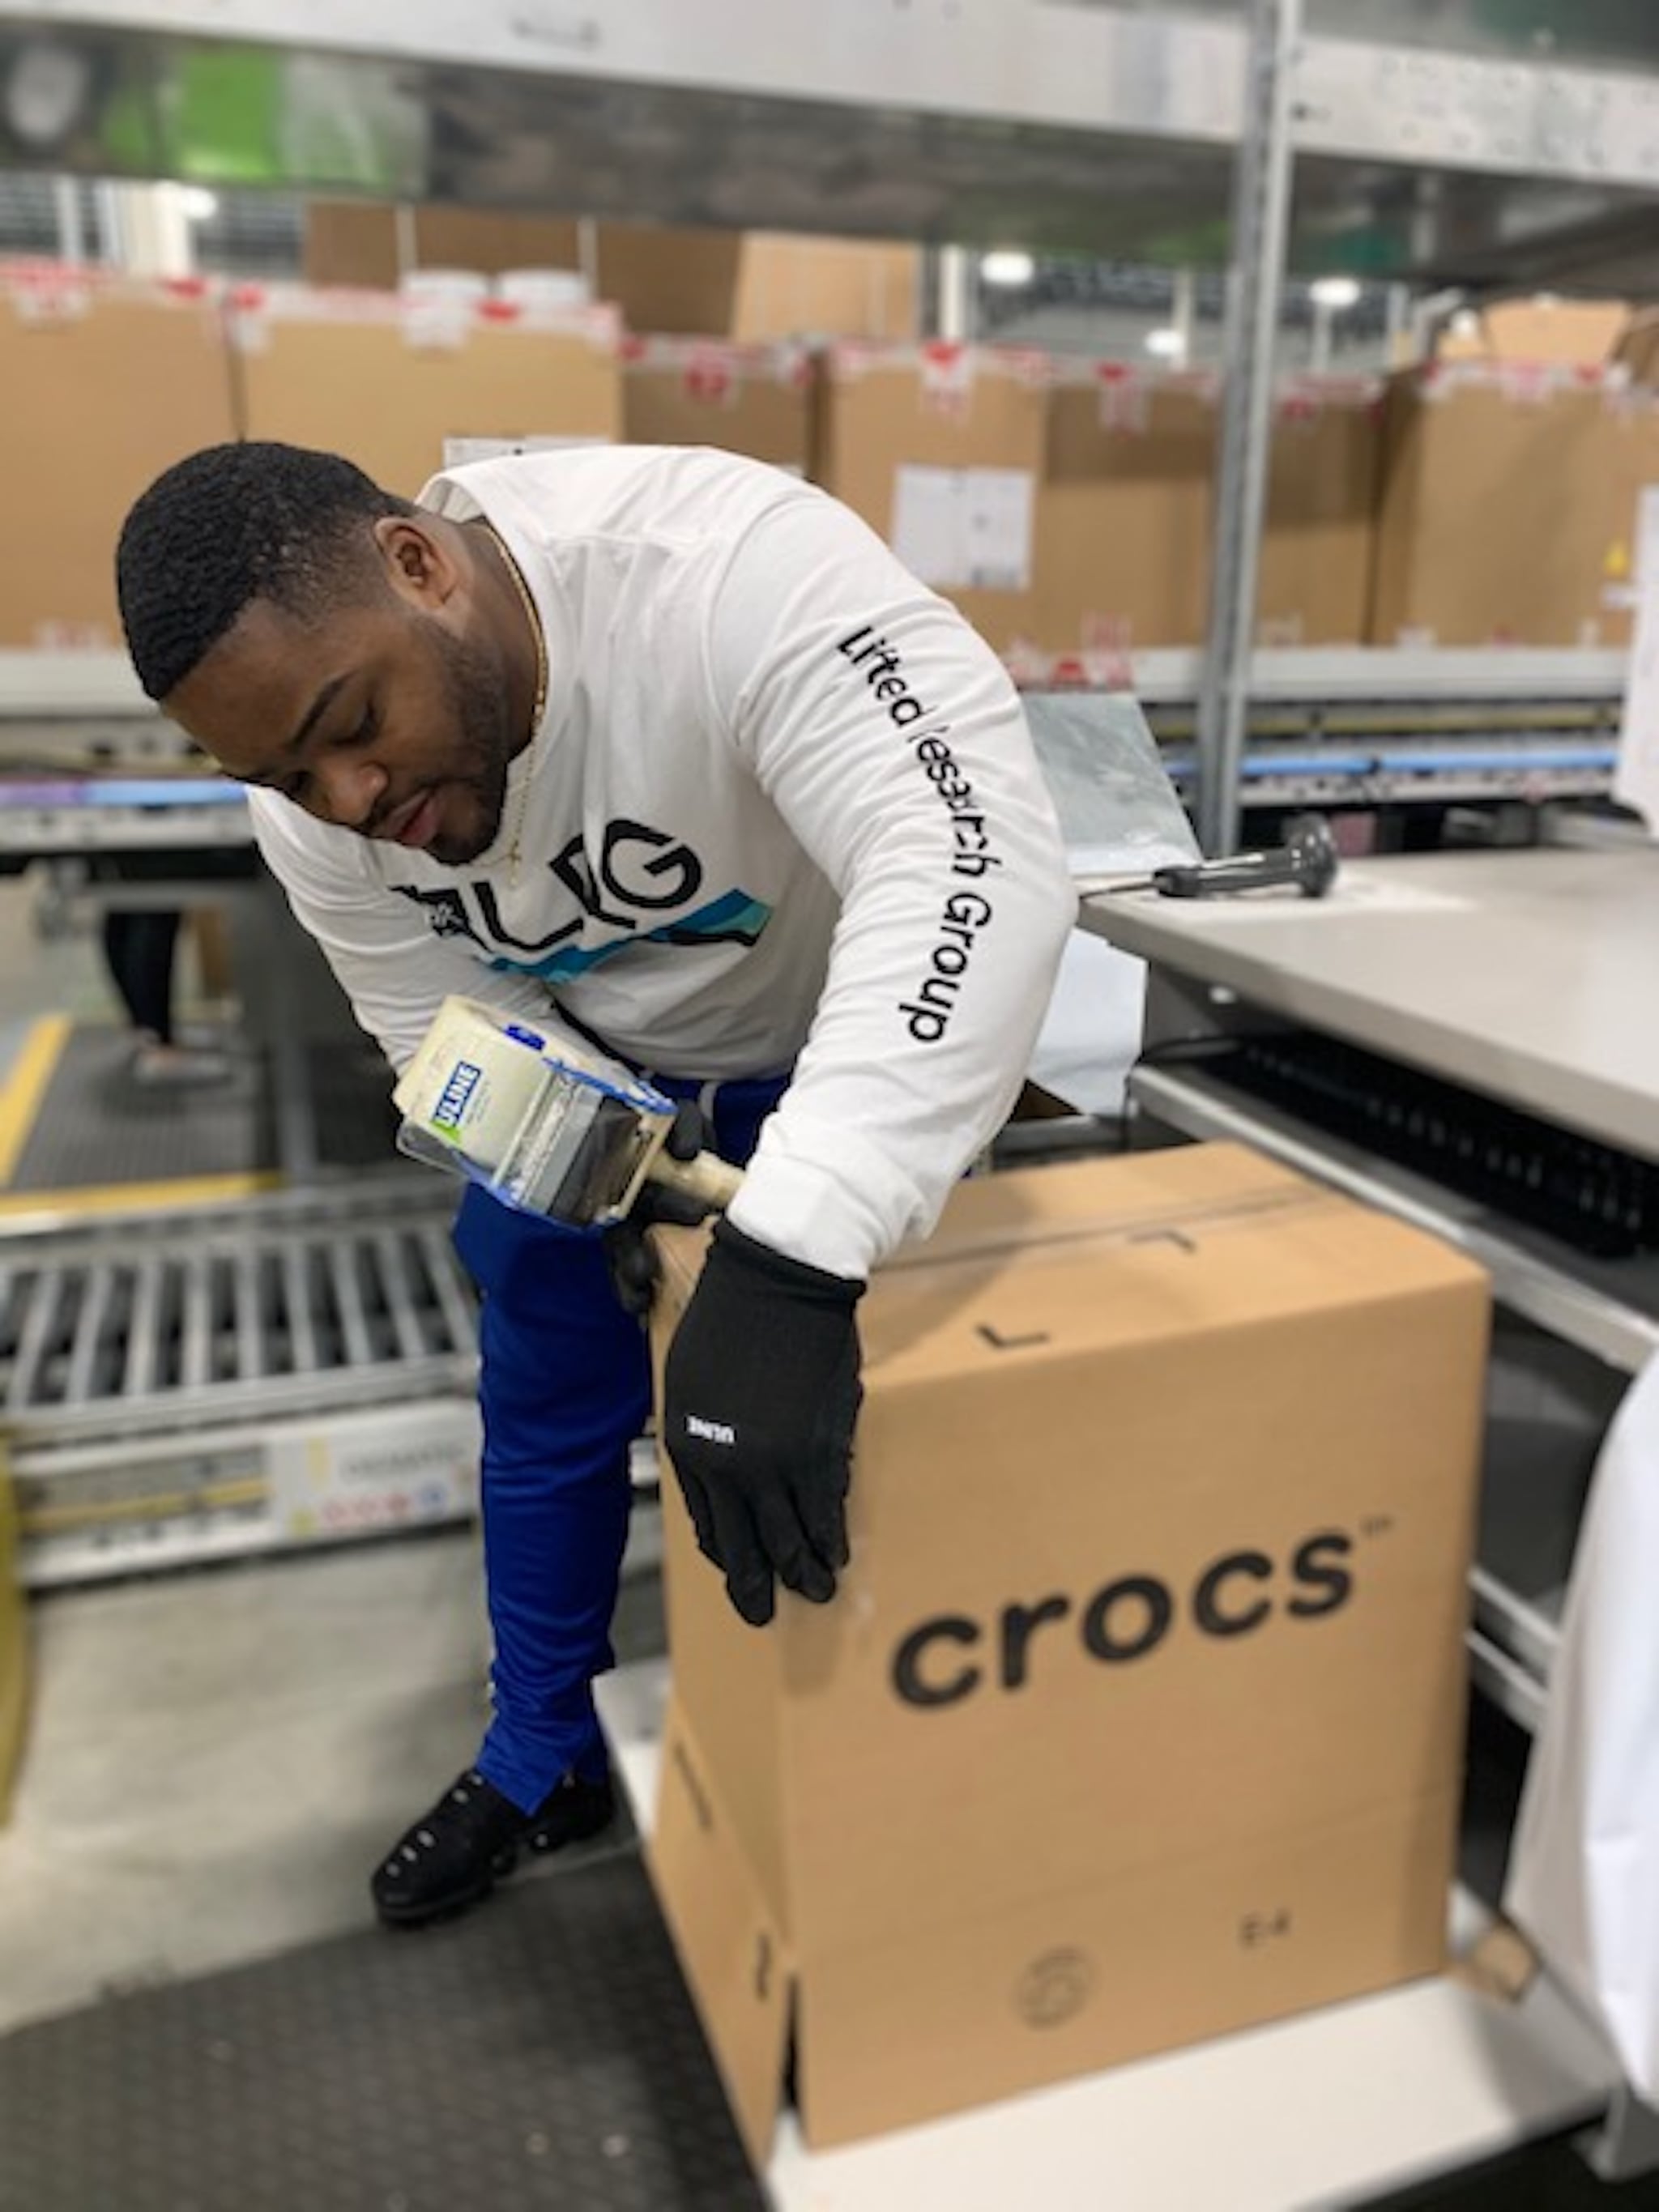 Crocs Expands Its Shoe Donation With 